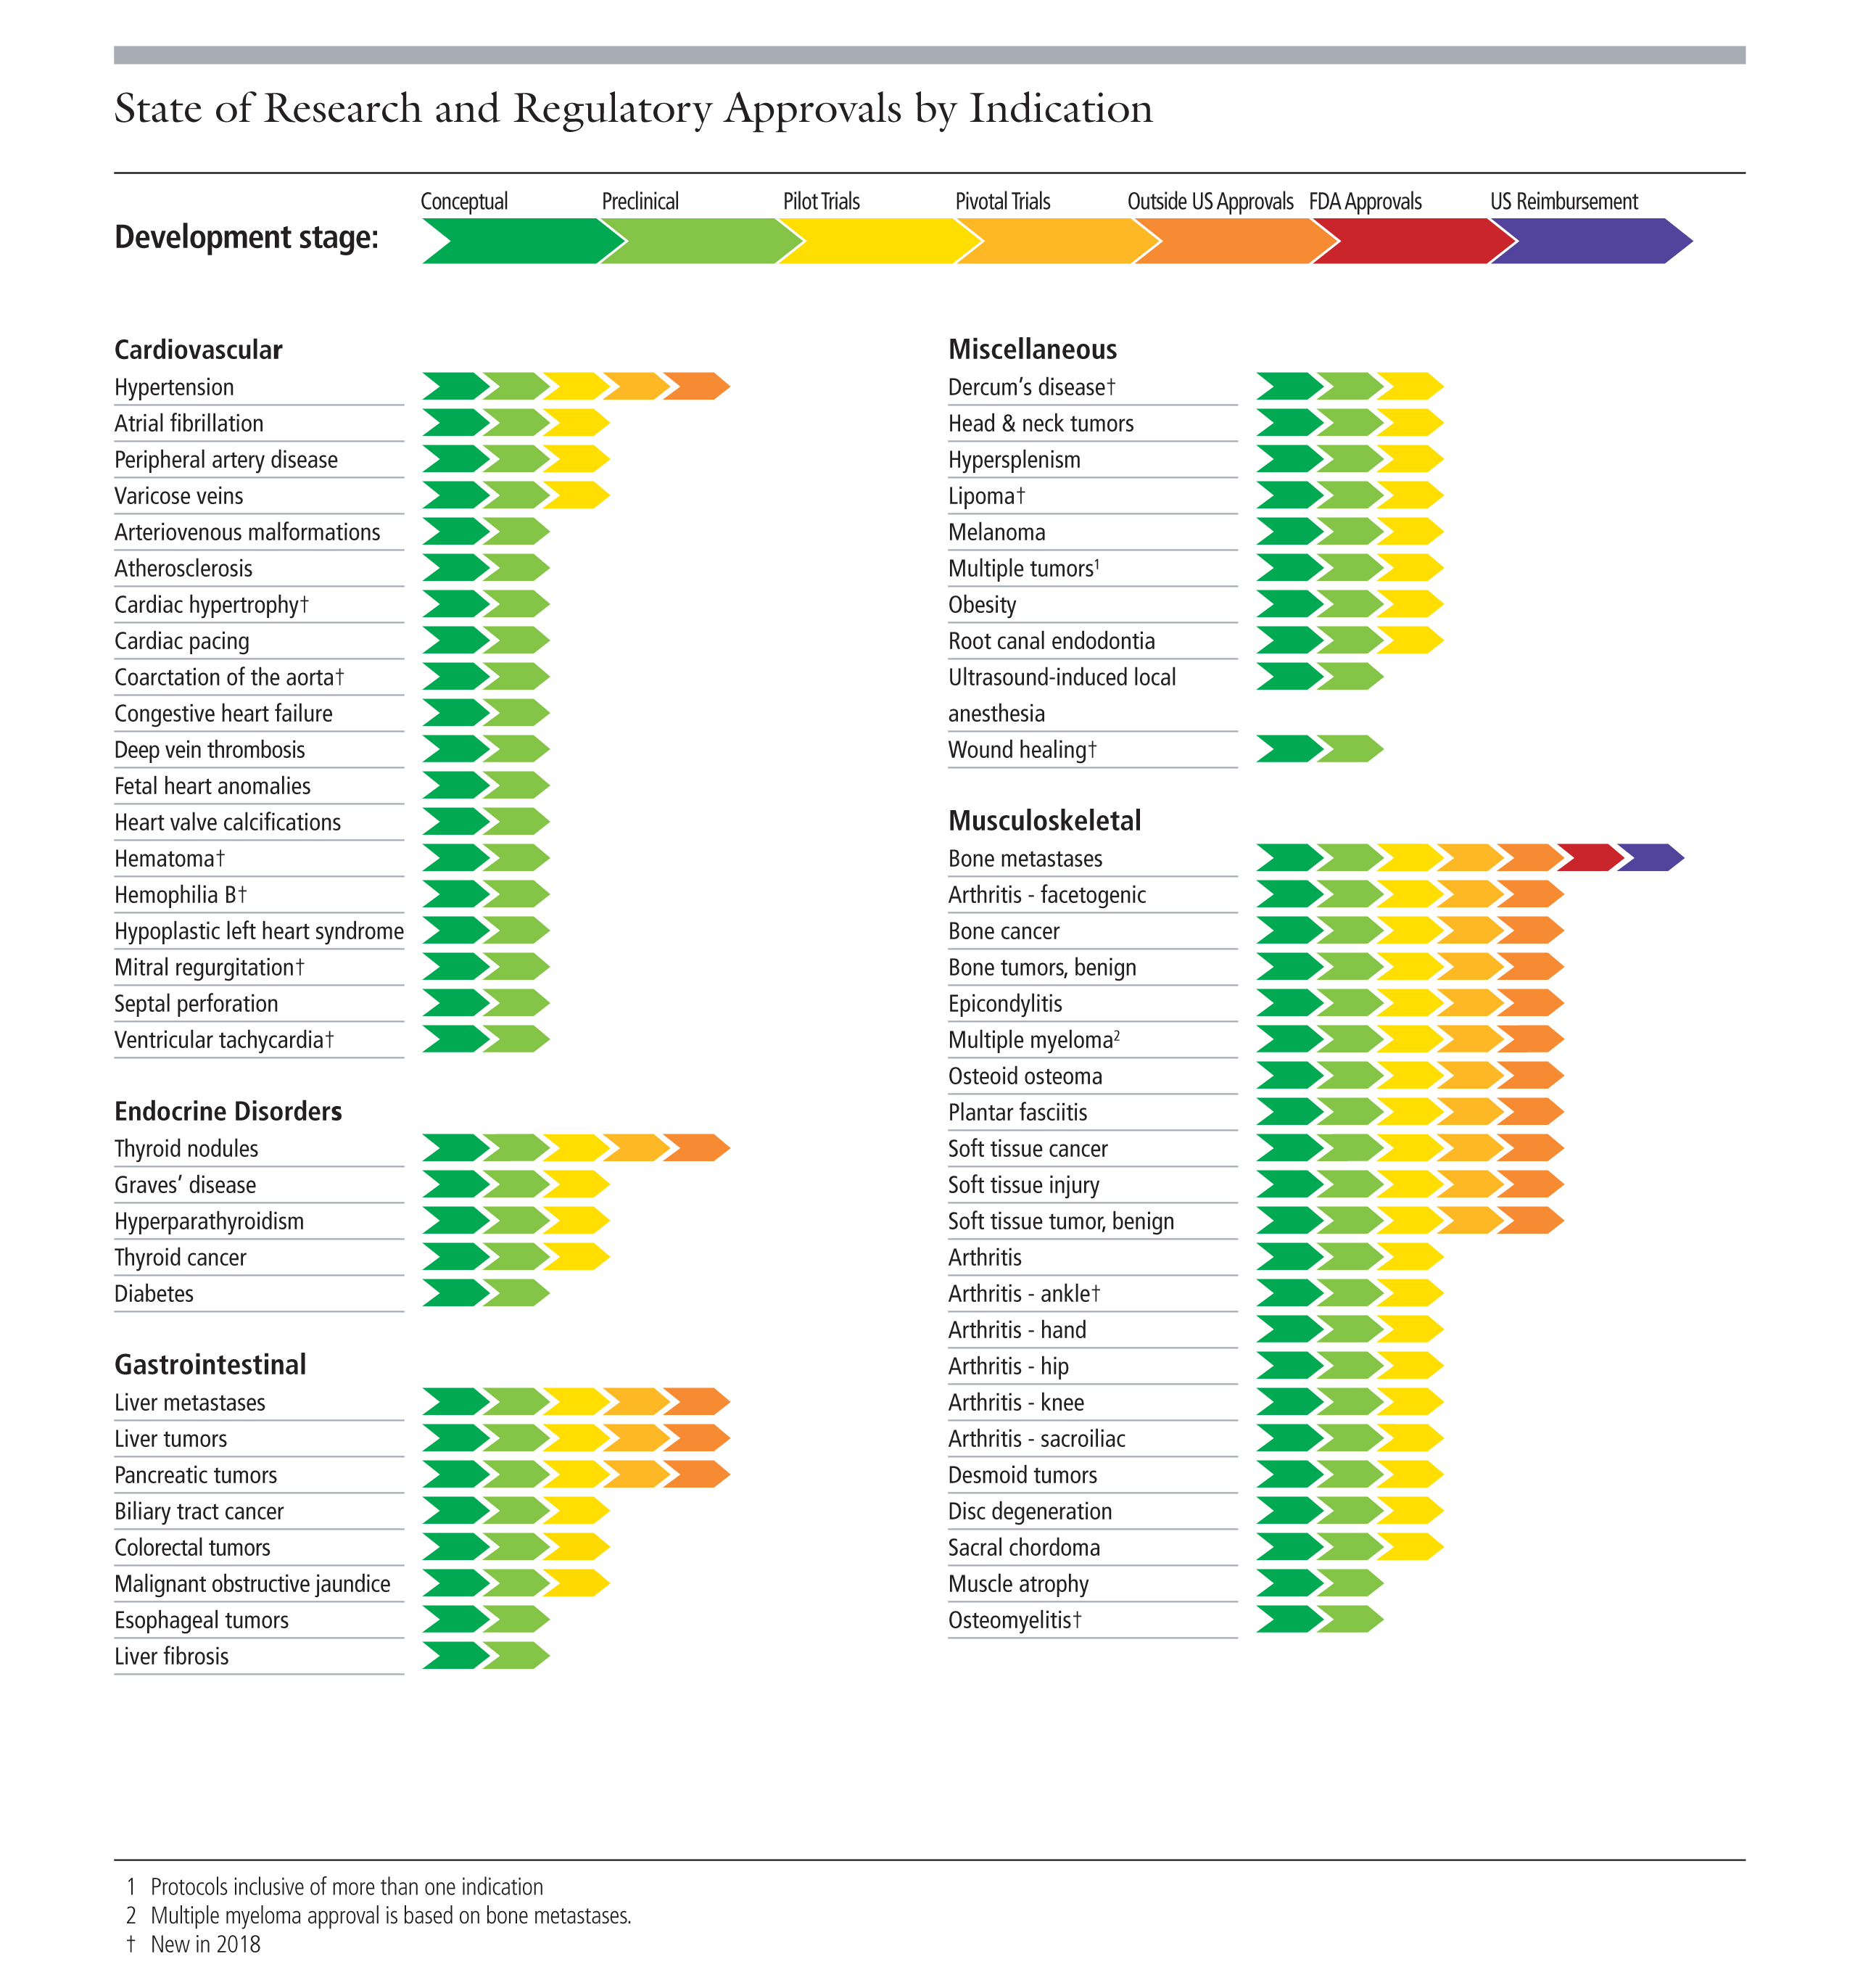 State of Research and Regulatory Approval by Indication